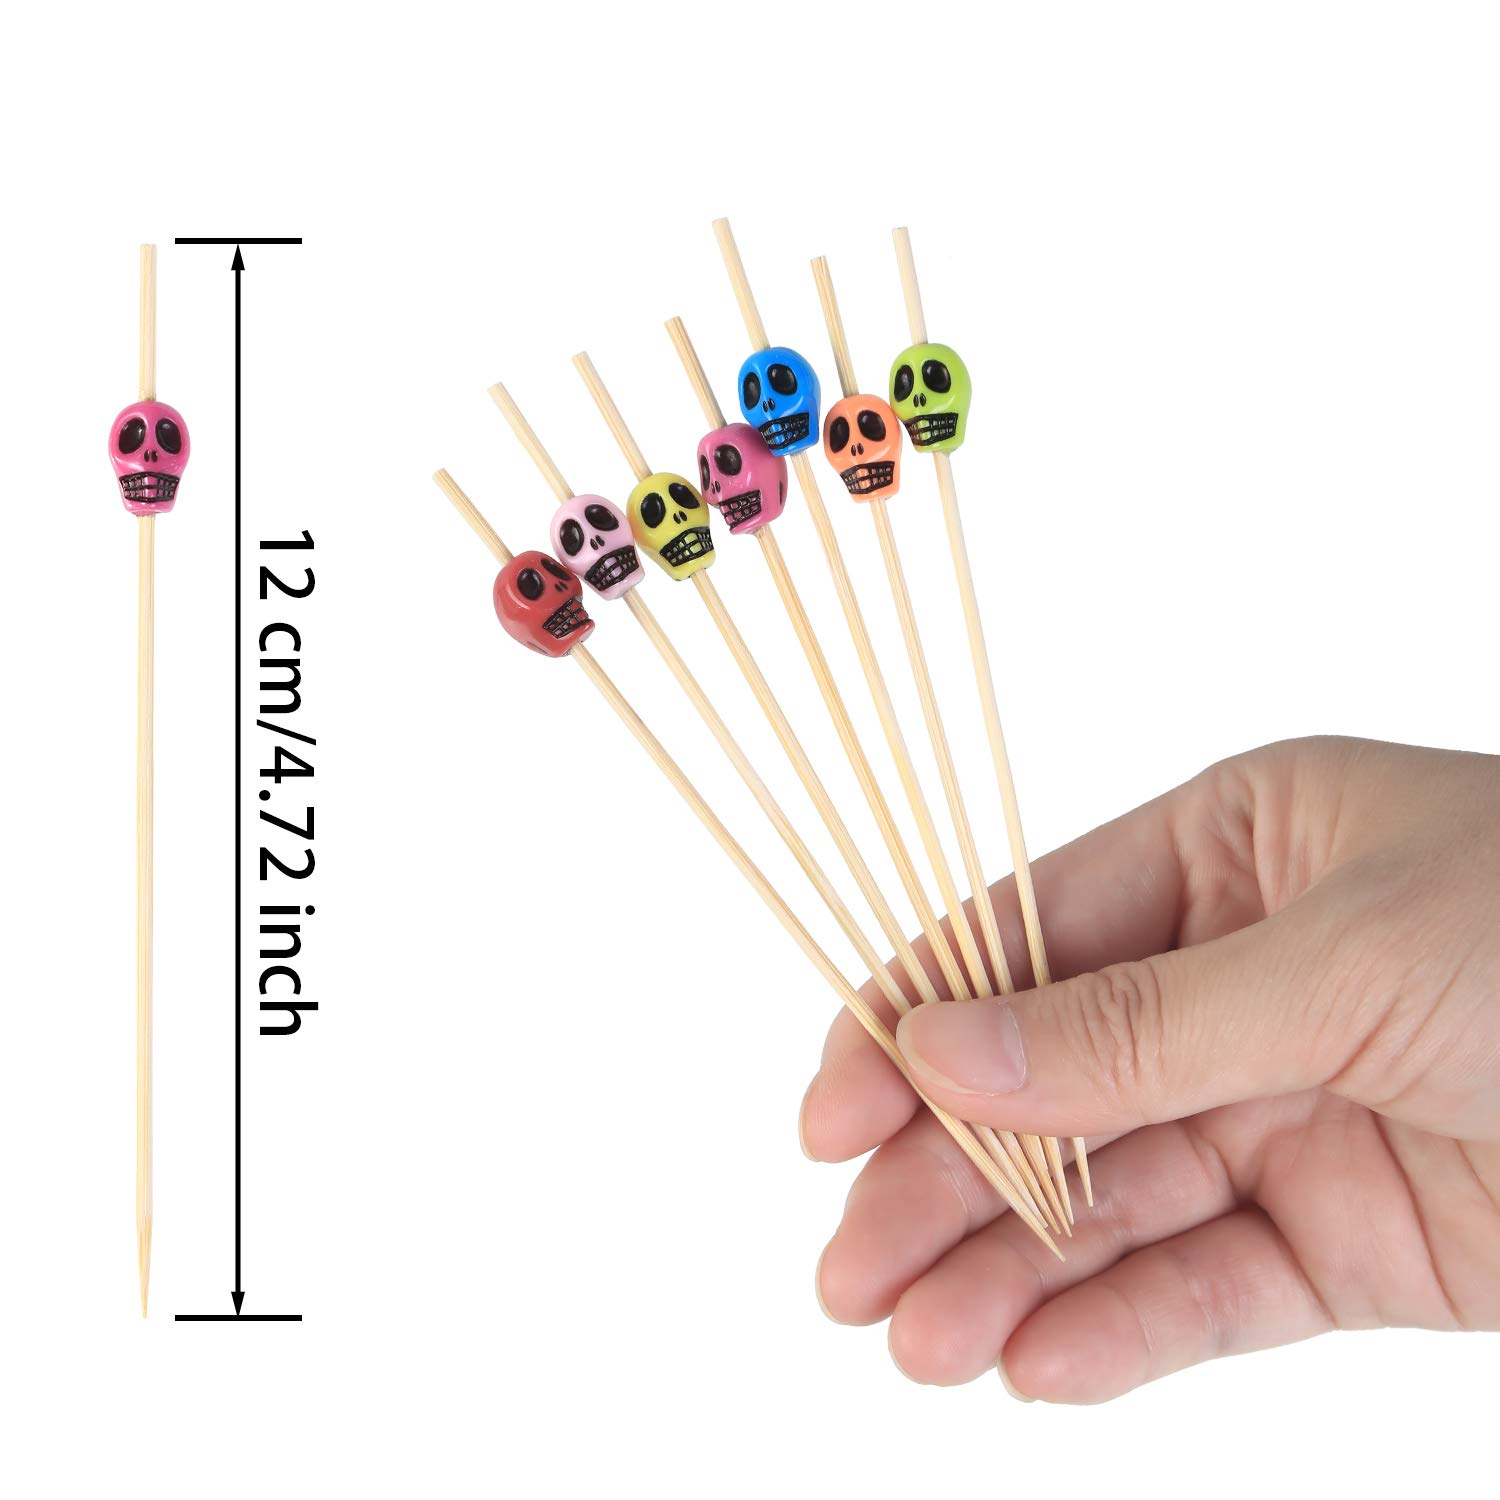 200 Pieces Skull Picks Skull Toothpicks Cocktail Picks for Drinks 4.7 Inch Skewers Stick Fancy Sandwich Appetizer Bamboo Skewers for Halloween Birthday Party Decorations (Rainbow Color)